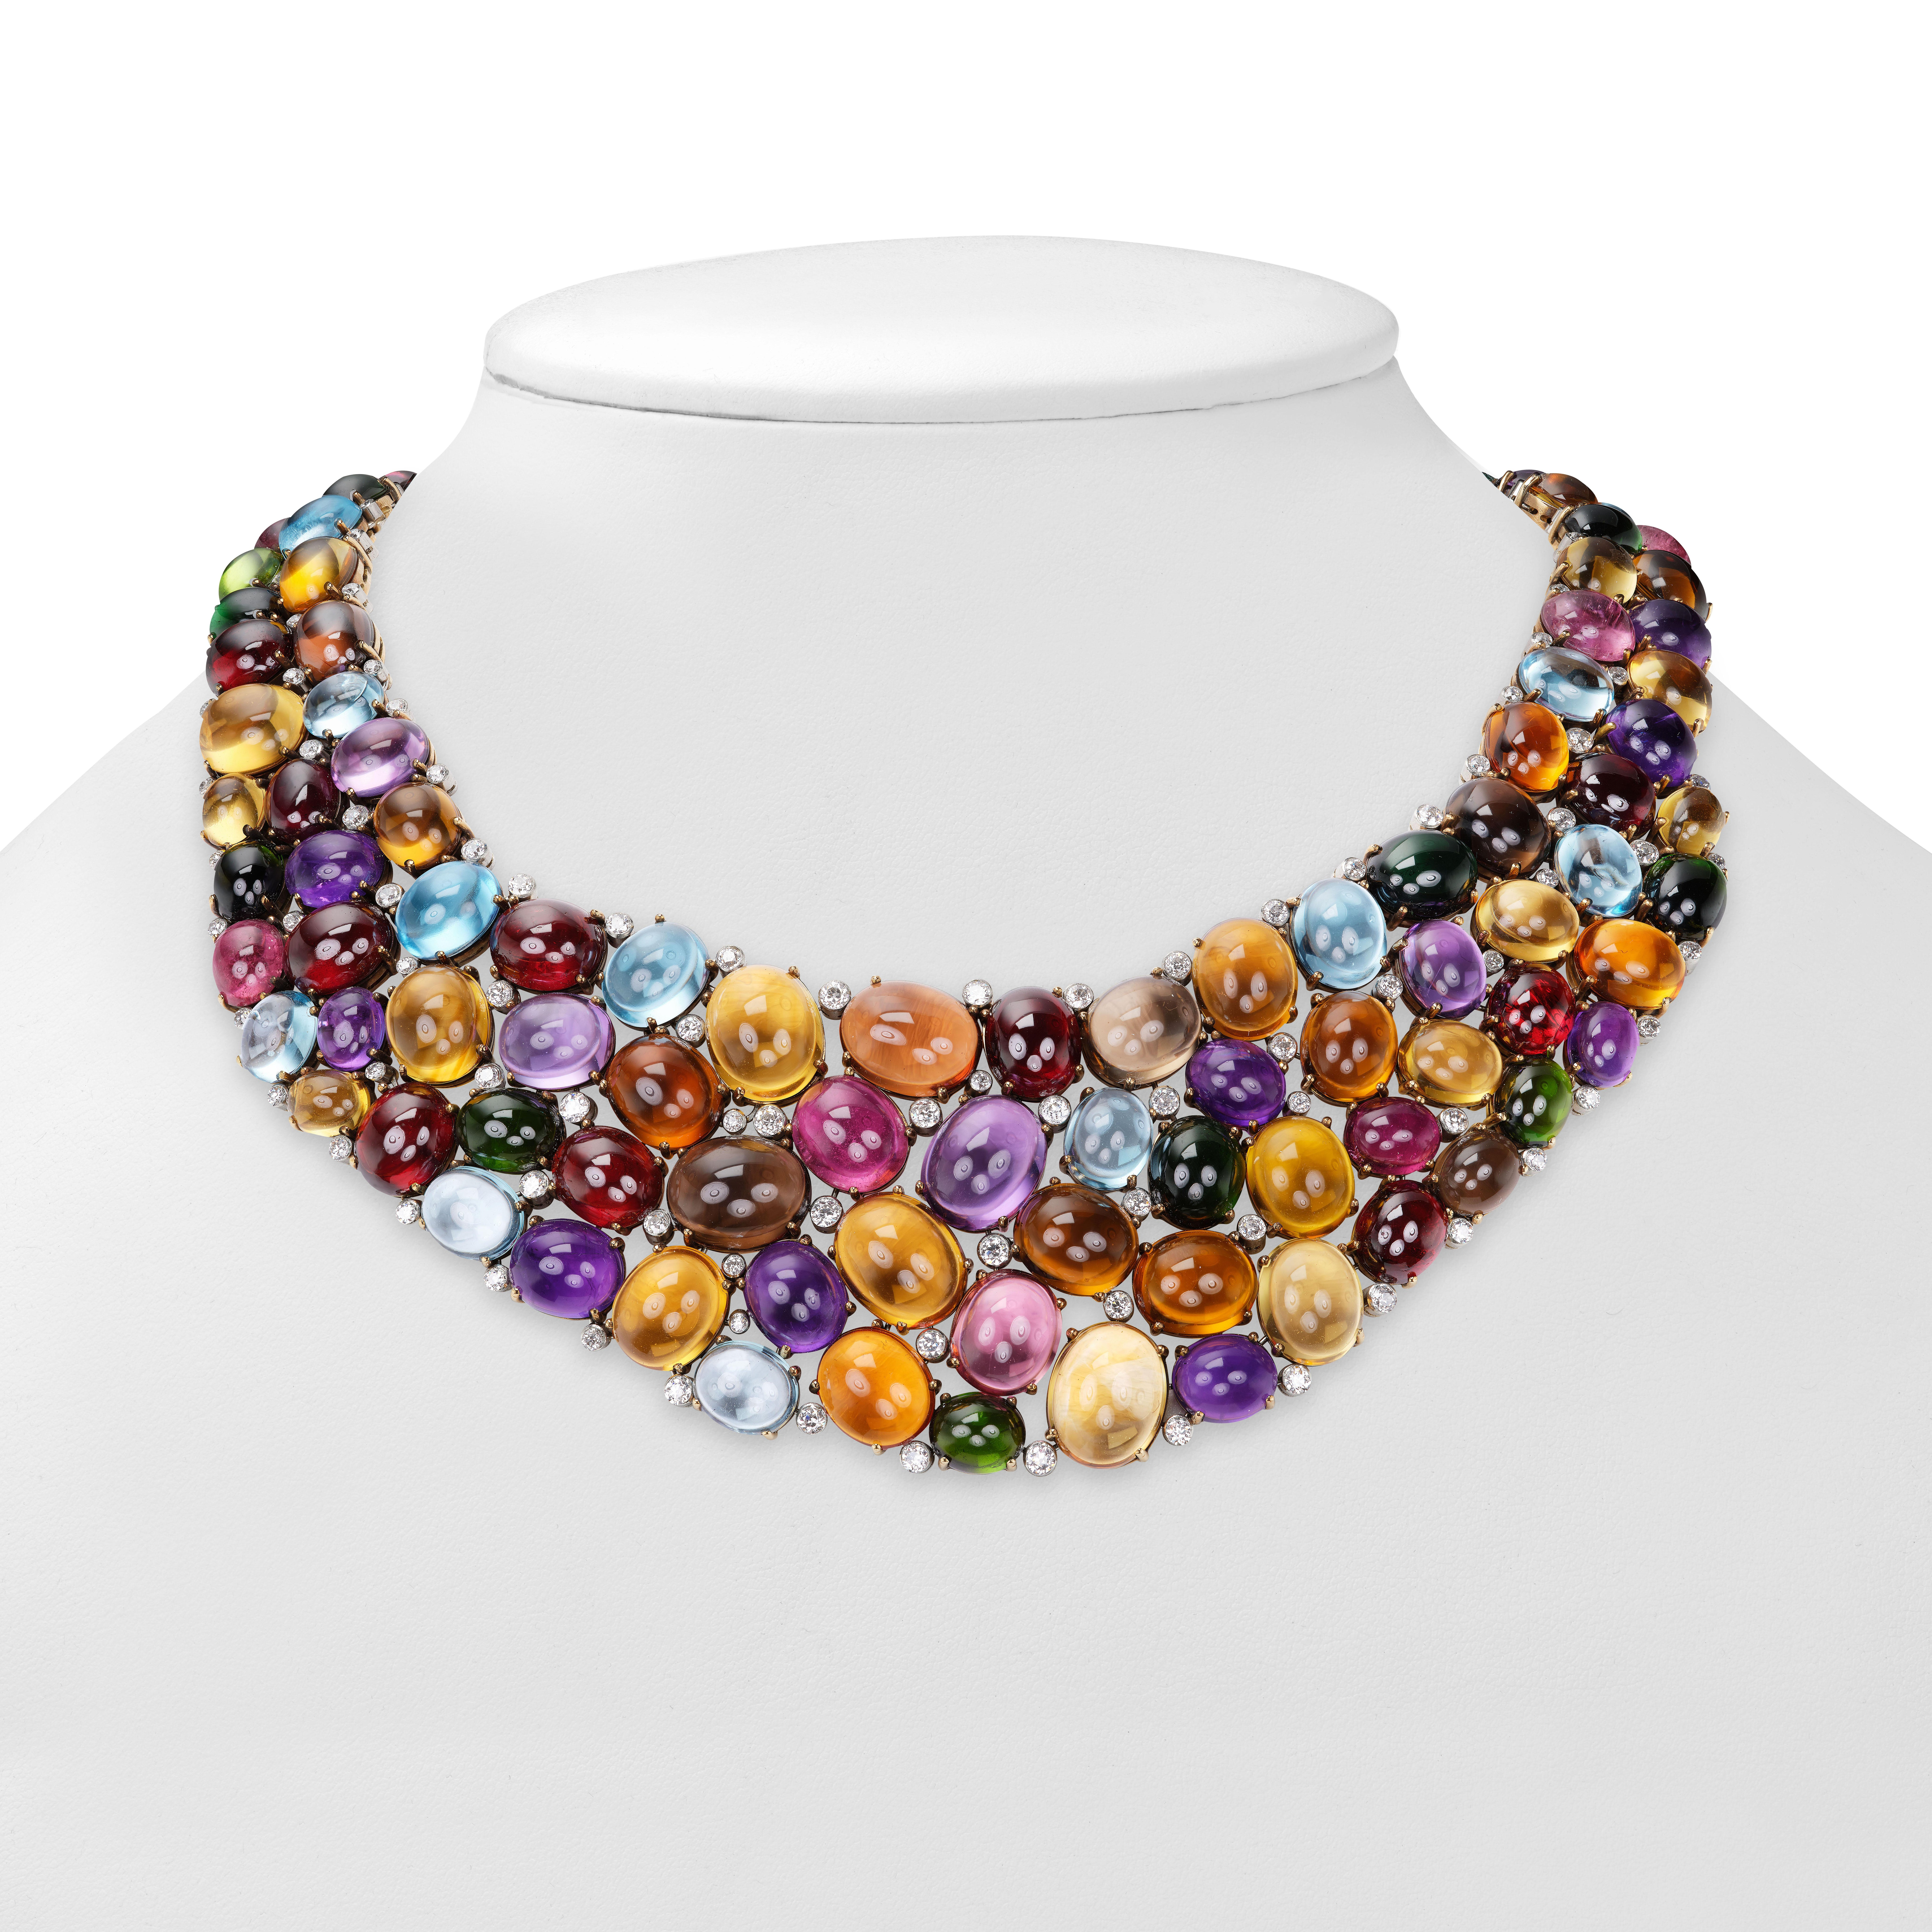 A whimsical and dynamic burst of color beckons with approximately 125 precious and semi-precious cabochon colored gems totalling approximately 1,065 carats and approximately 125 round brilliant diamonds weighing approximately 10 carats set in a